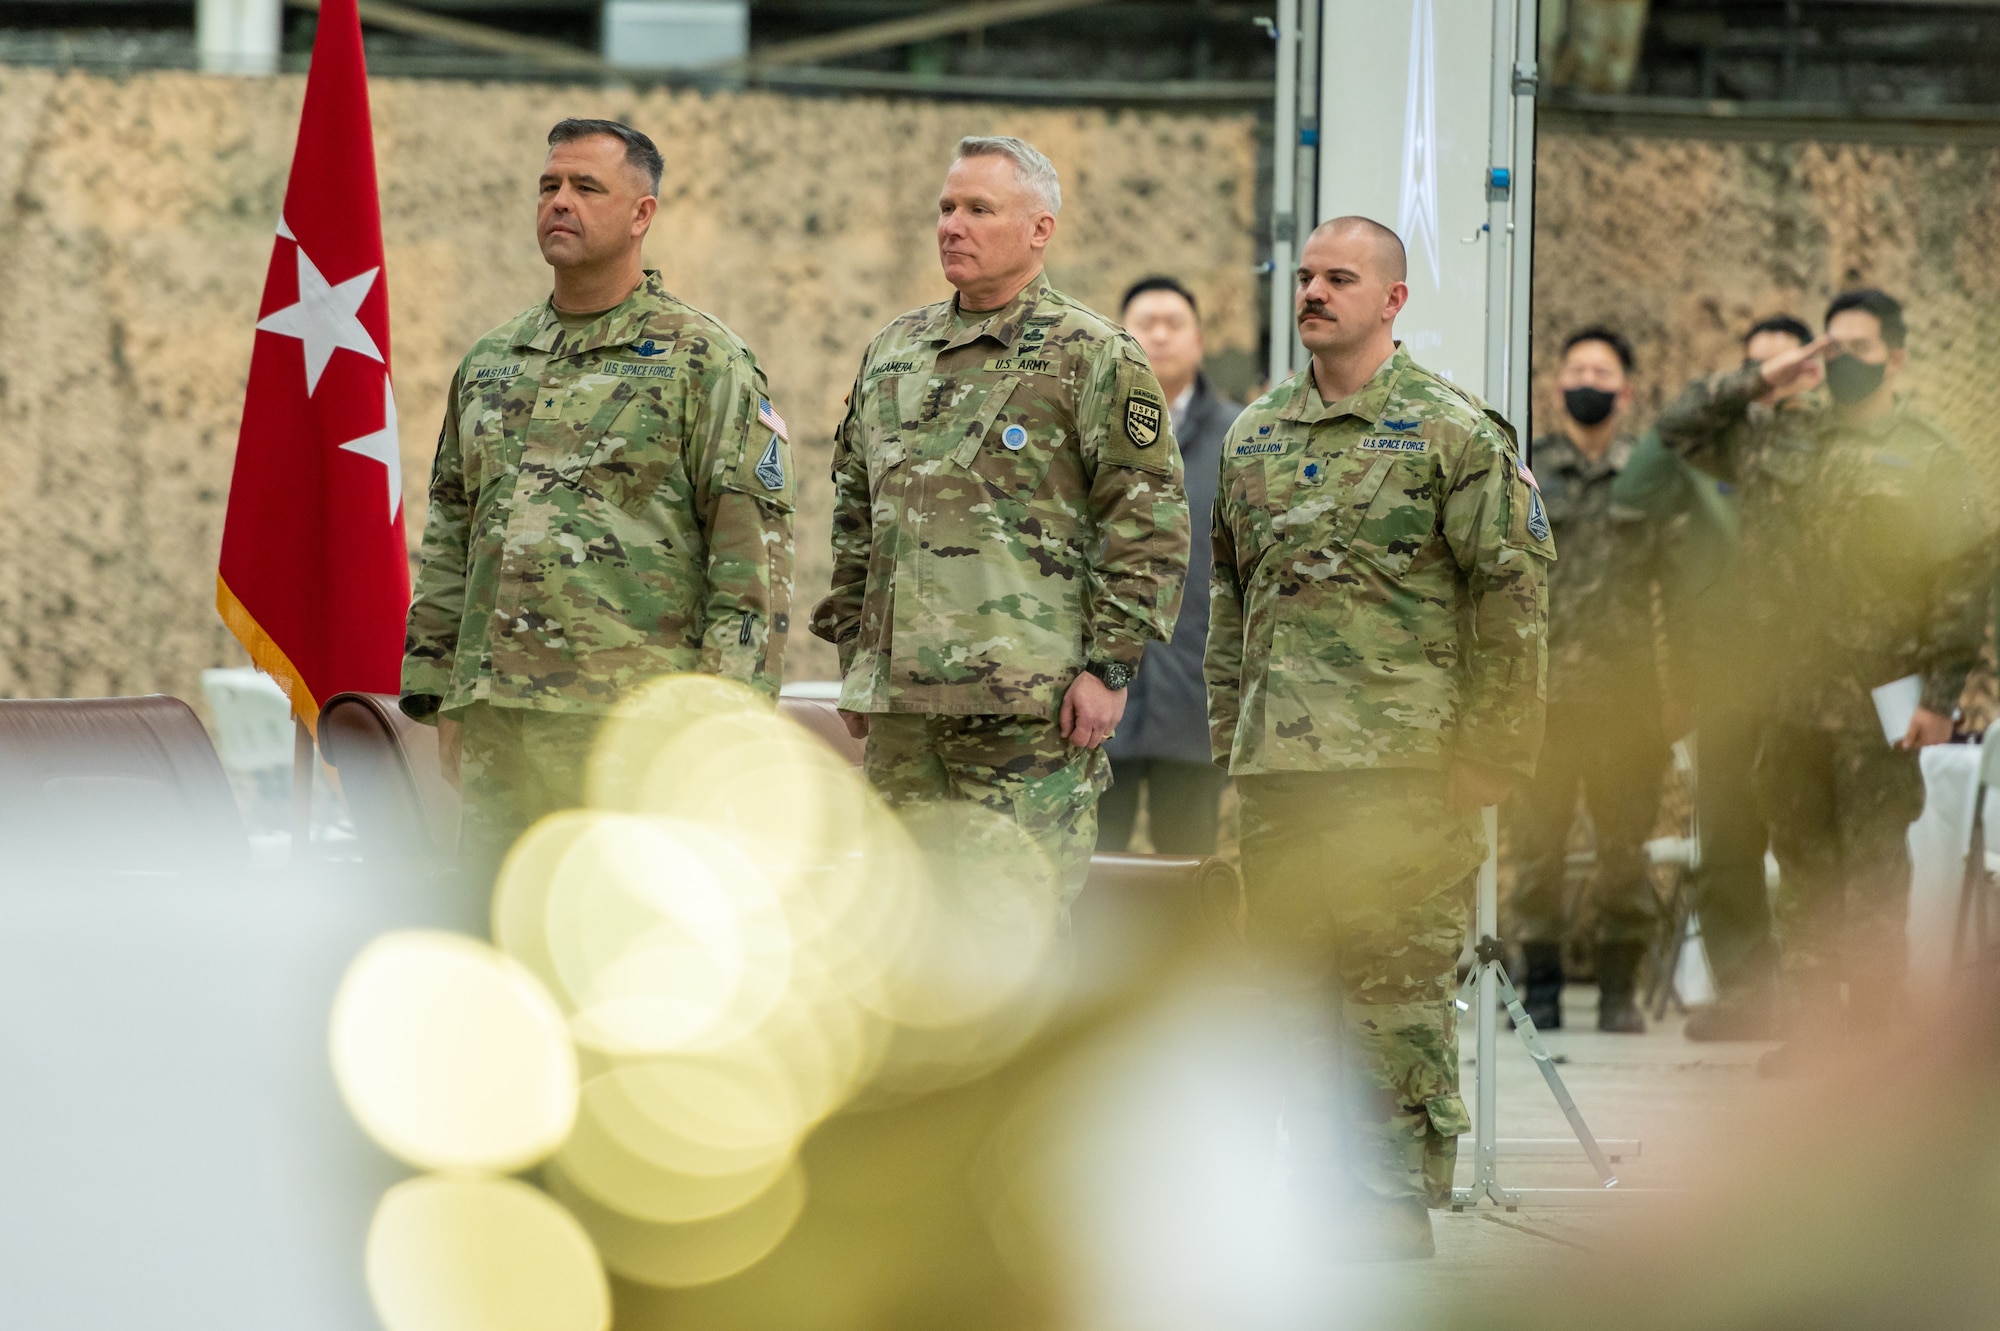 (From left) U.S. Space Force Brig. Gen. Anthony Mastalir, U.S. Space Forces Indo-Pacific Command commander, U.S. Army Gen. Paul LaCamera, U.S. Forces Korea commander, and USSF Lt. Col. Joshua McCullion, U.S. Space Forces Korea inaugural commander, stand at attention during the USSFK activation ceremony at Osan Air Base, Republic of Korea, Dec. 14, 2022.